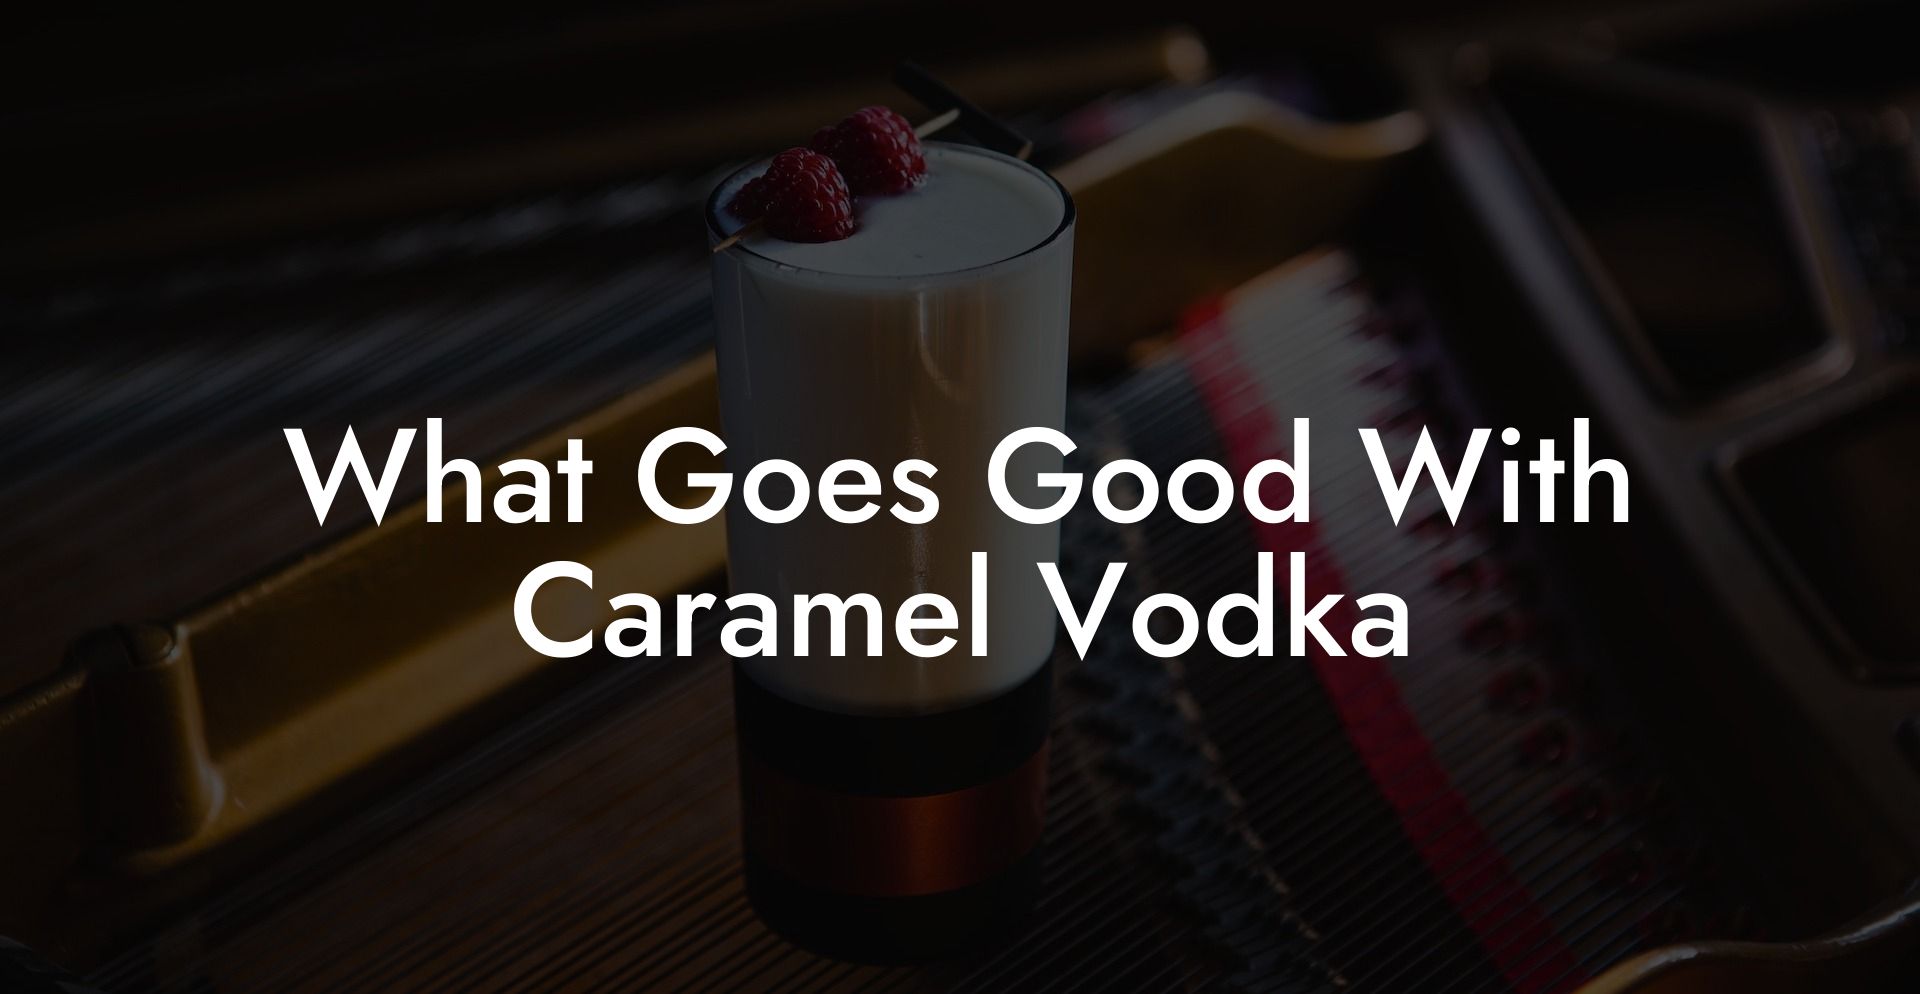 What Goes Good With Caramel Vodka